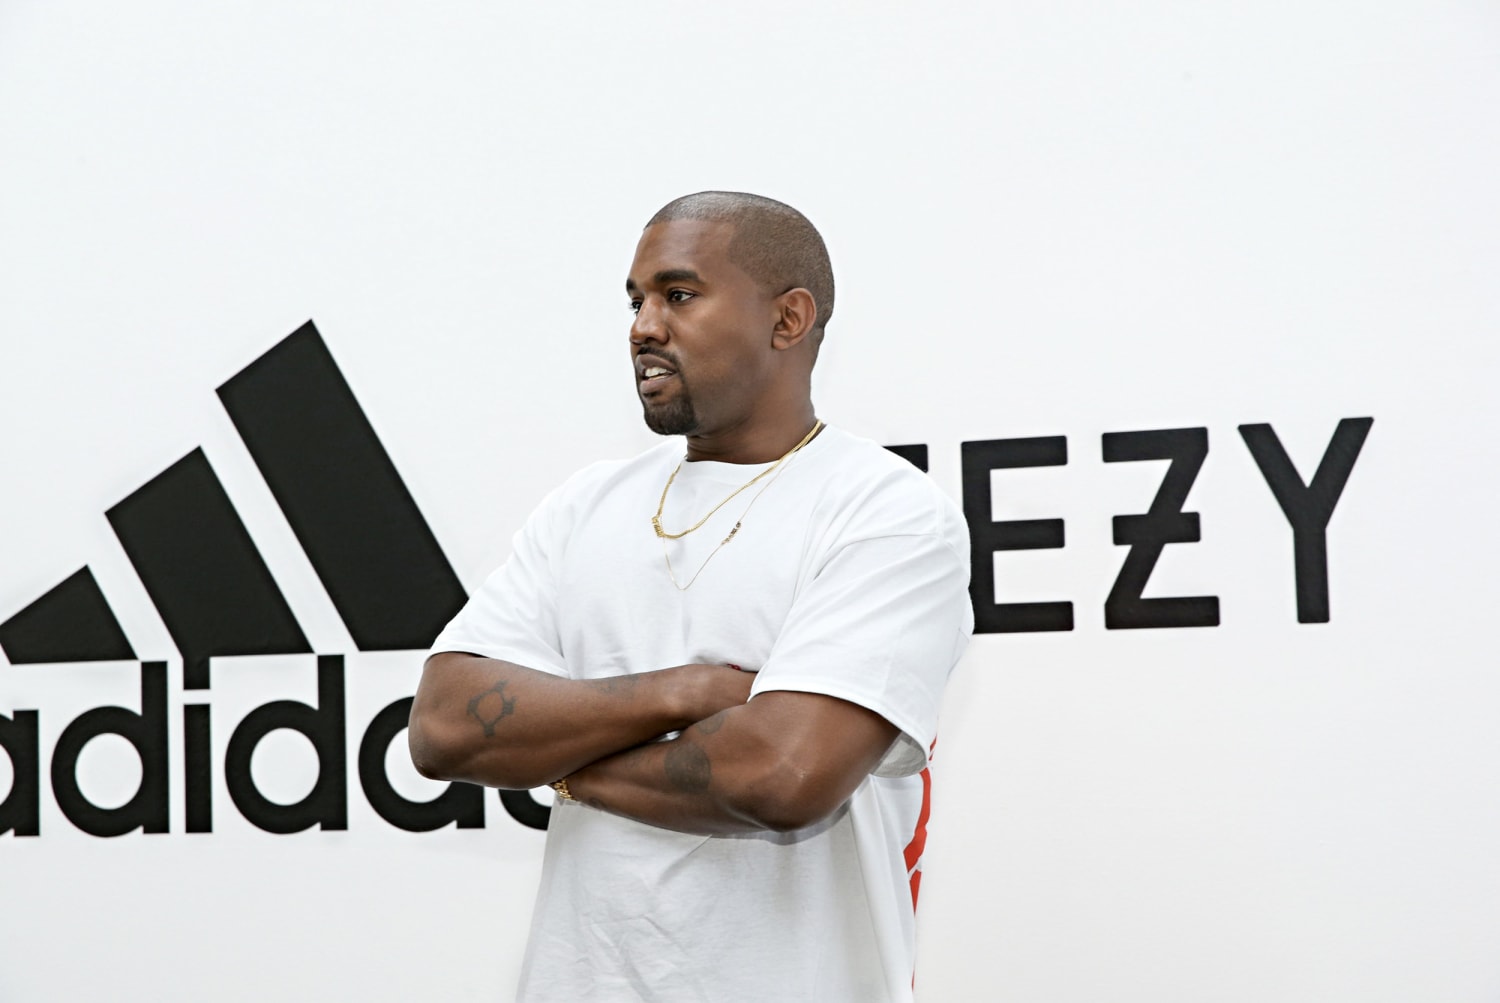 Adidas selling Yeezy shoes after cutting ties with Kanye West